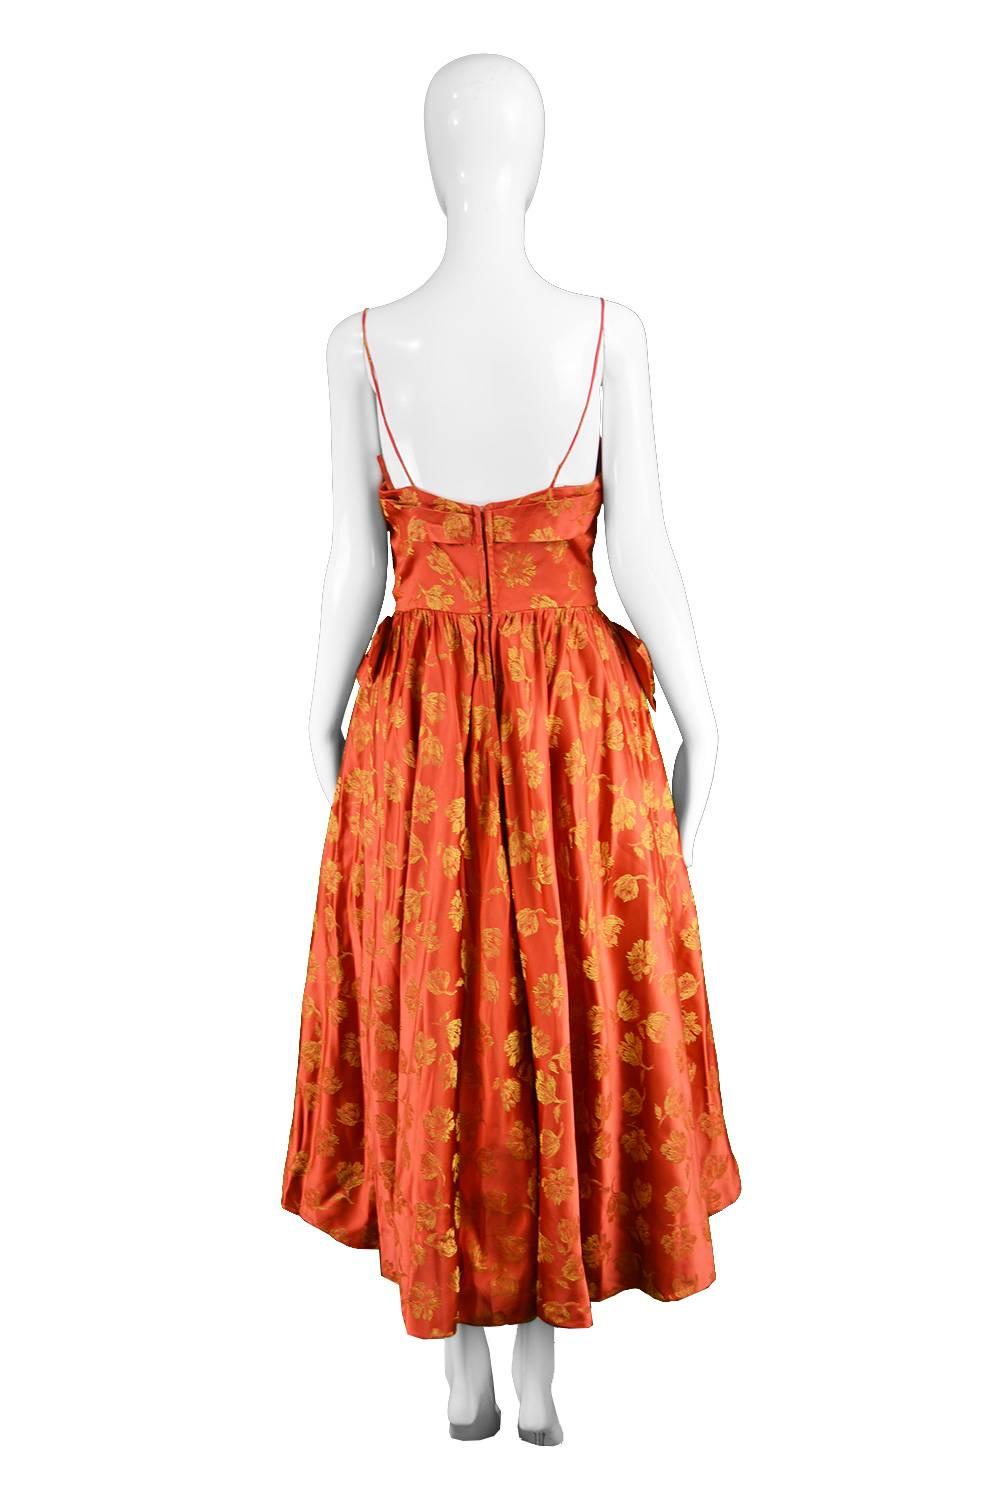 Women's John Selby 1950s Vintage Red & Gold Brocade Jacquard Panelled Dress